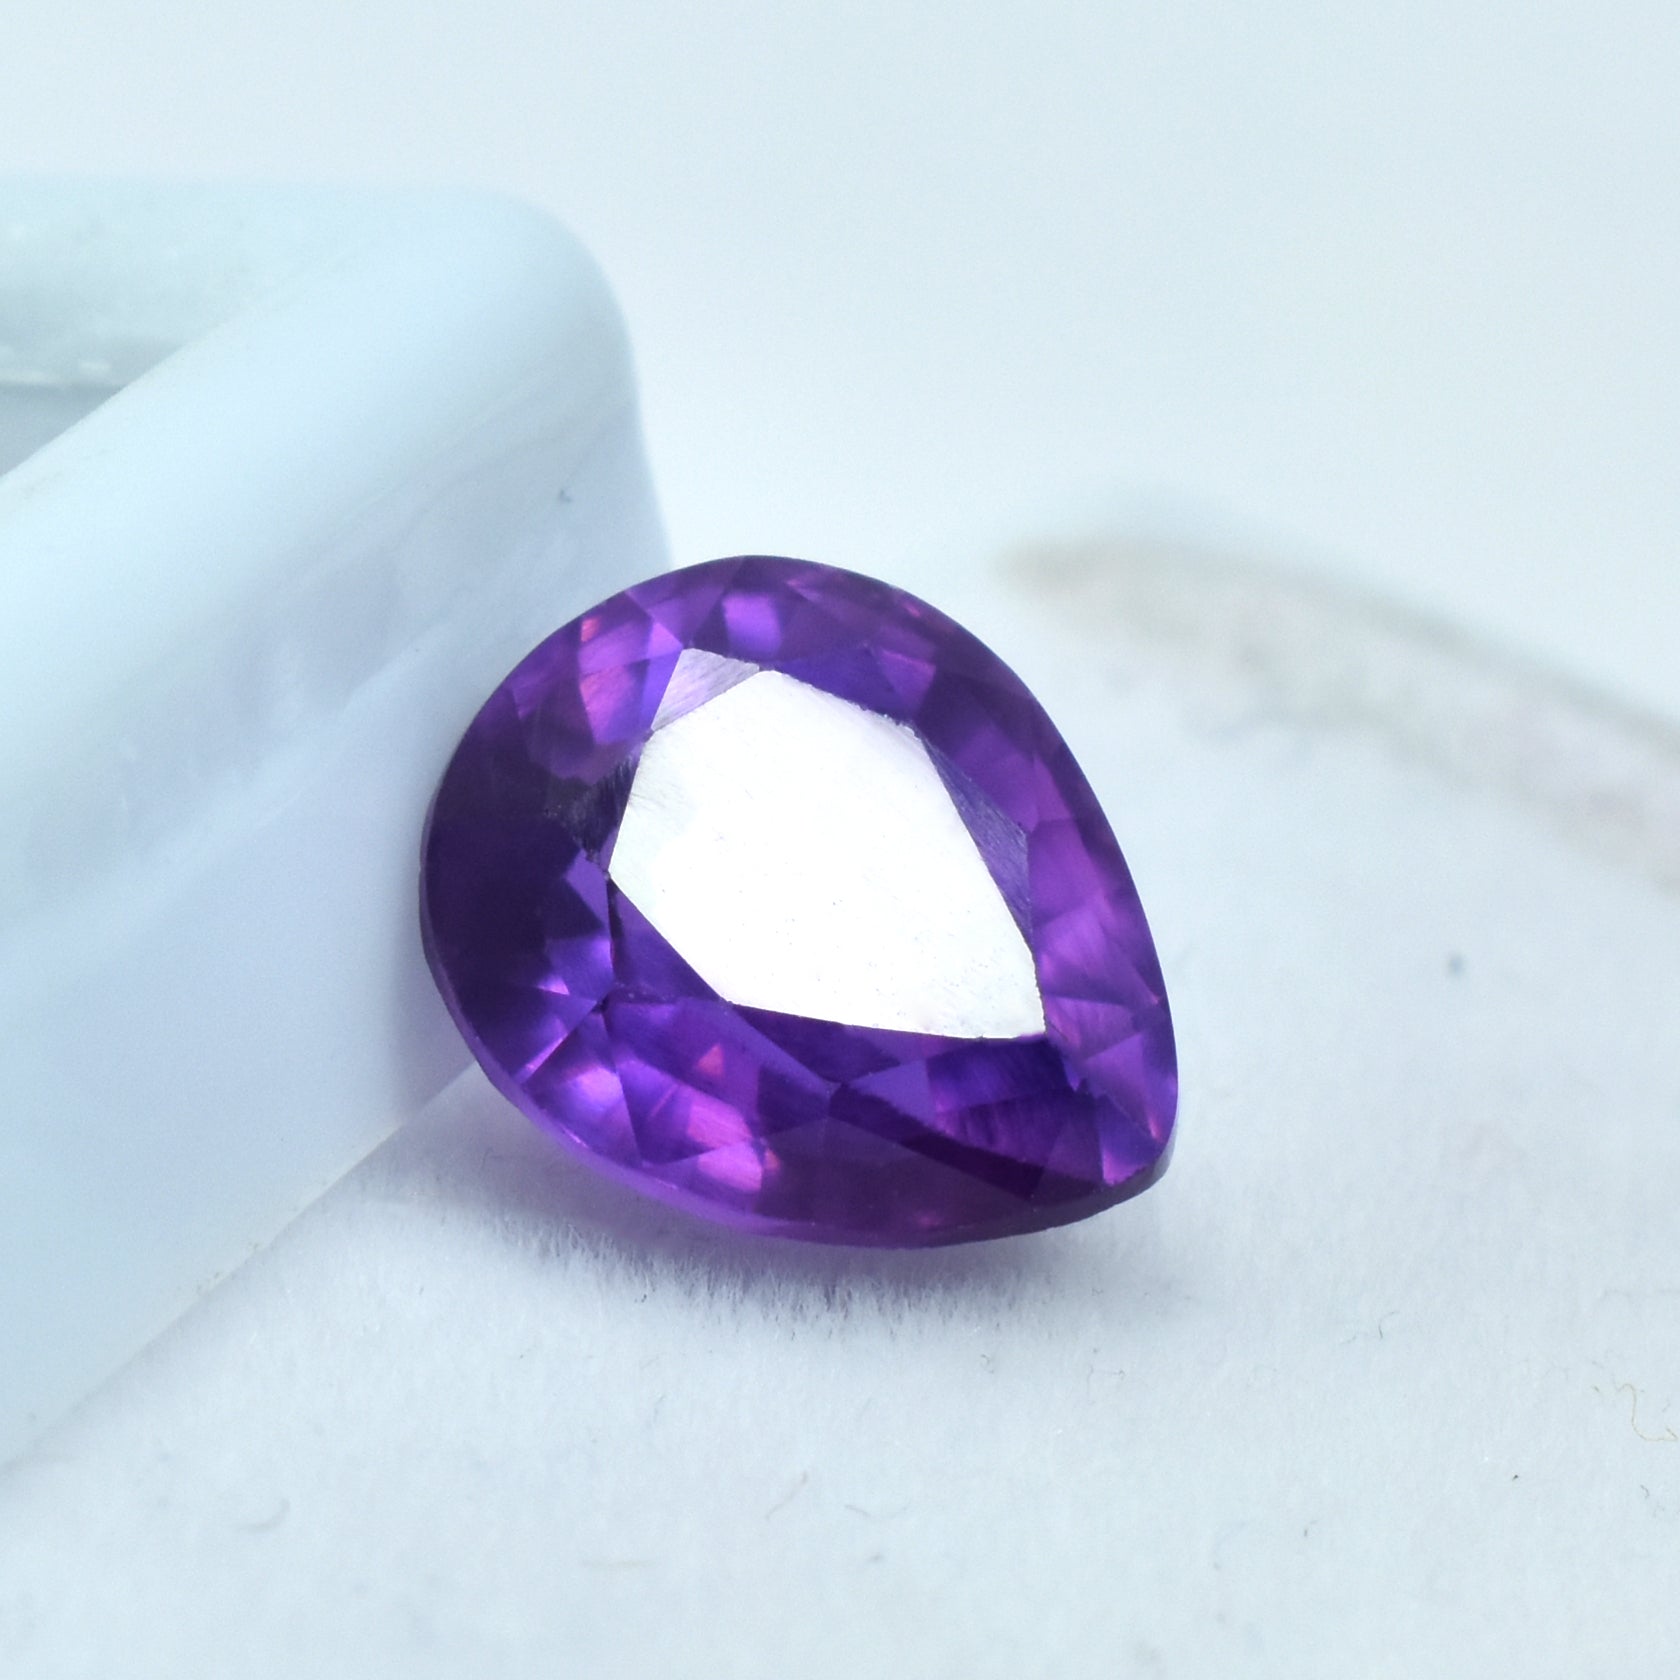 Most Stunning Gem | Free Delivery & Gift | Color Change Sapphire 9.89 Carat Pear Shape Natural Certified Purple Loose Gemstone